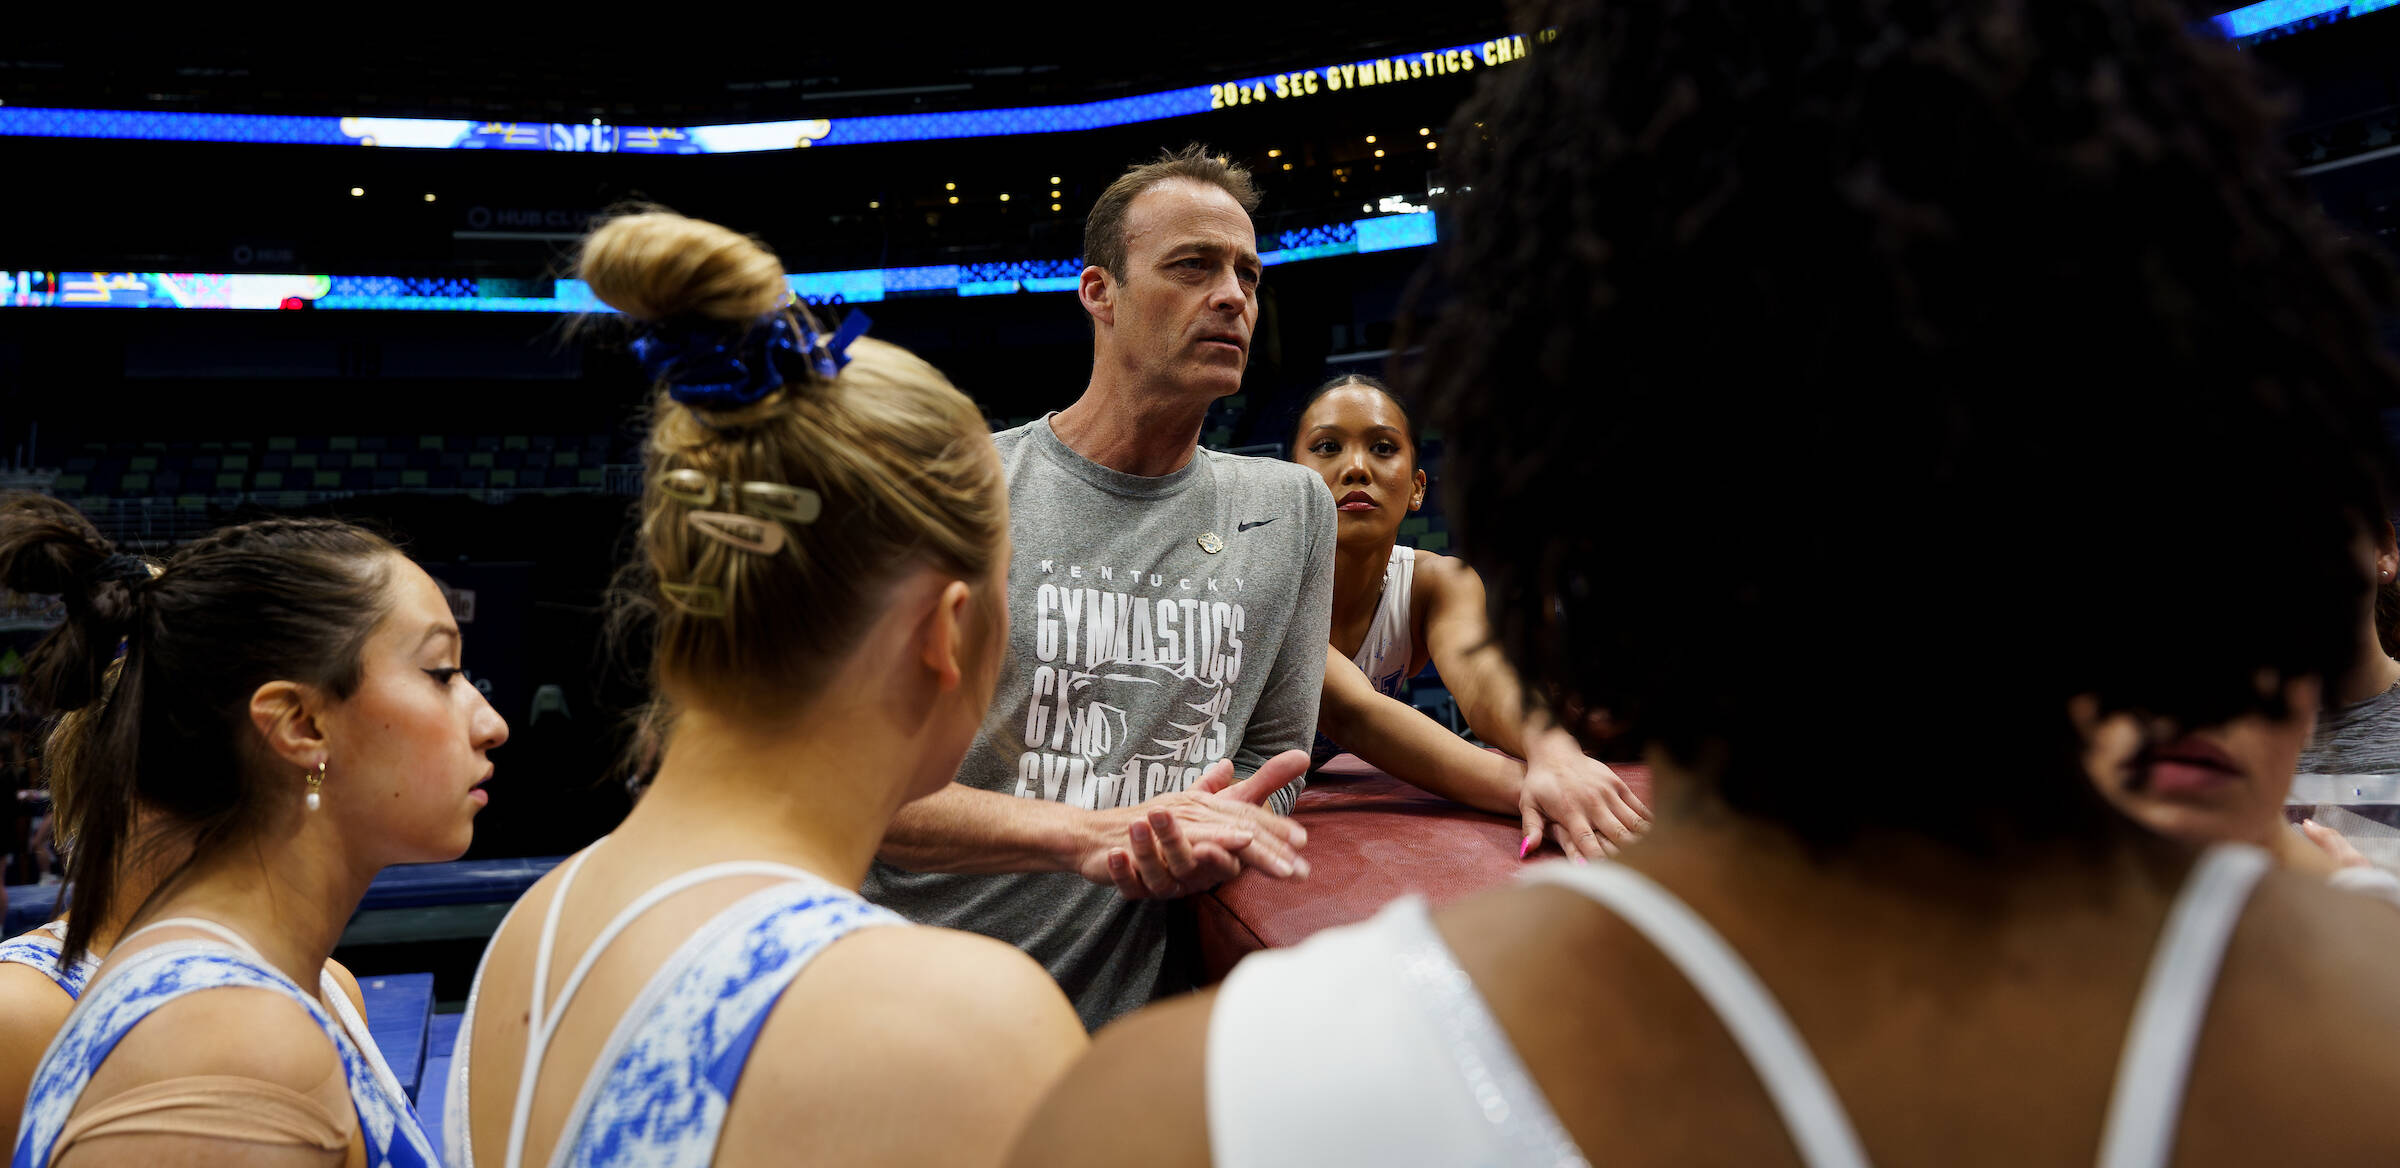 Garrison Named SEC Co-Coach of the Year, Four Gymnasts Earn All-SEC Honors